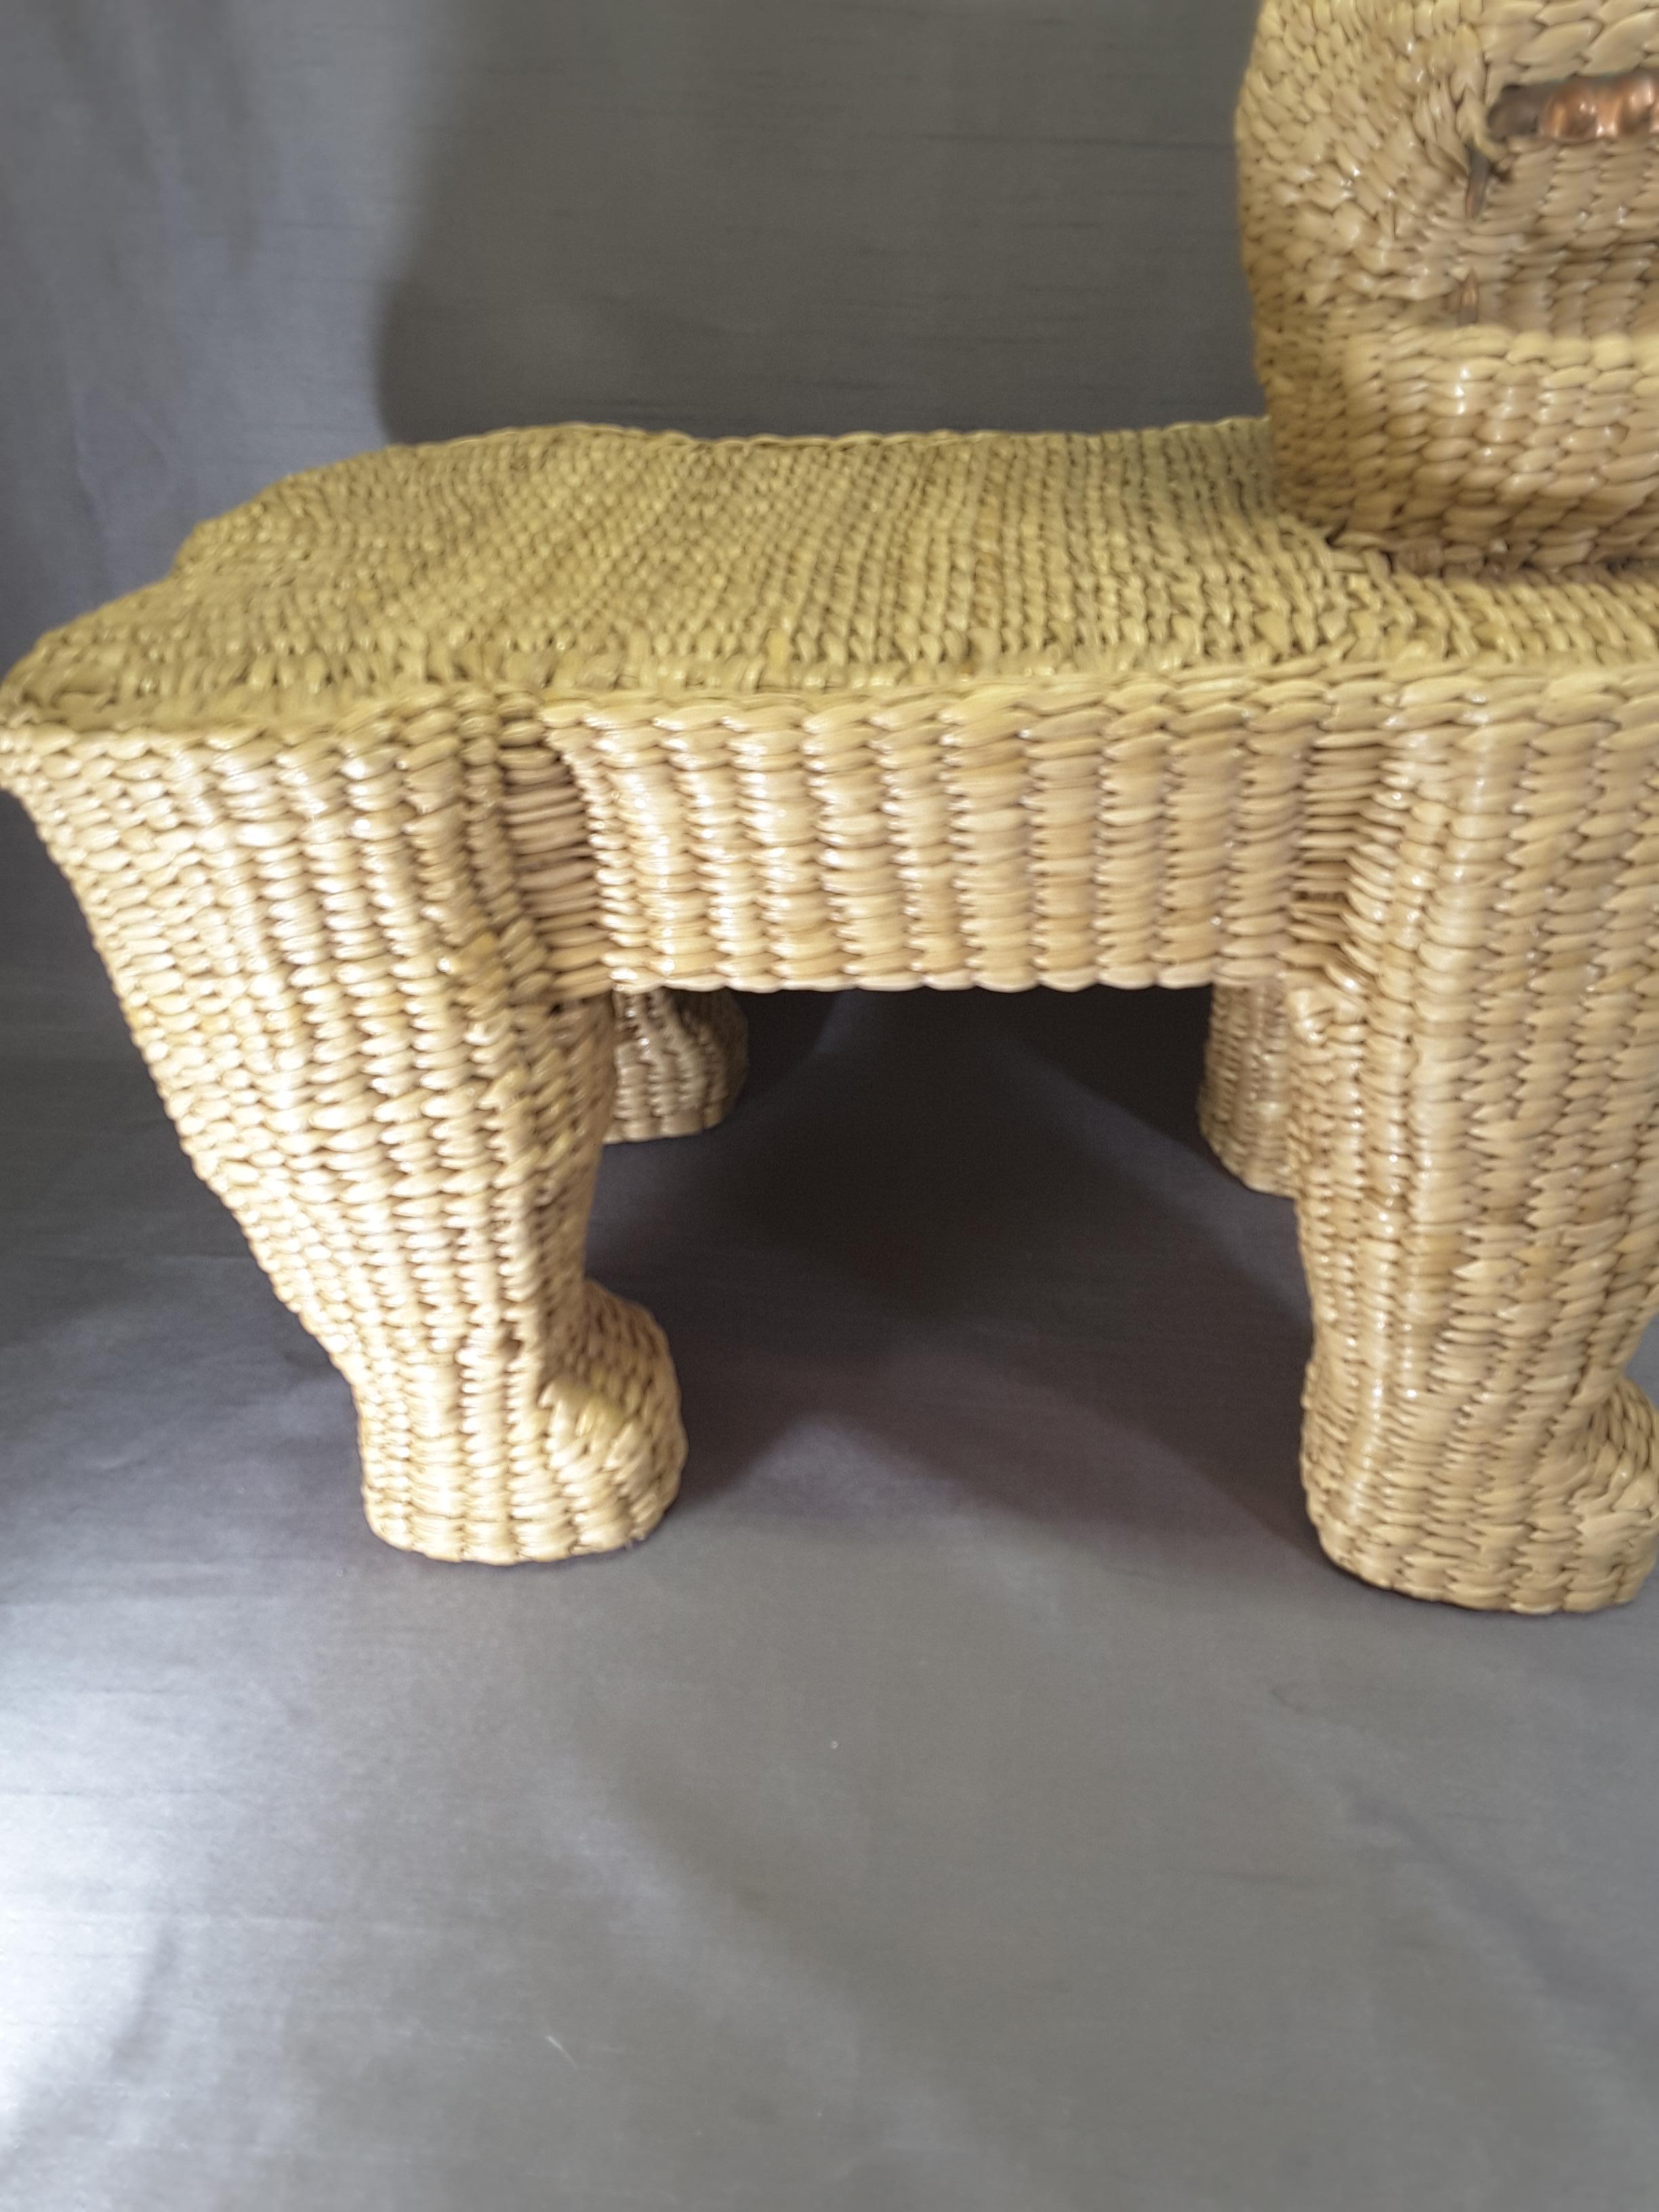 Mario Lopez Torres Wicker Panther Stool, Early 1970s In Good Condition For Sale In Ottawa, Ontario